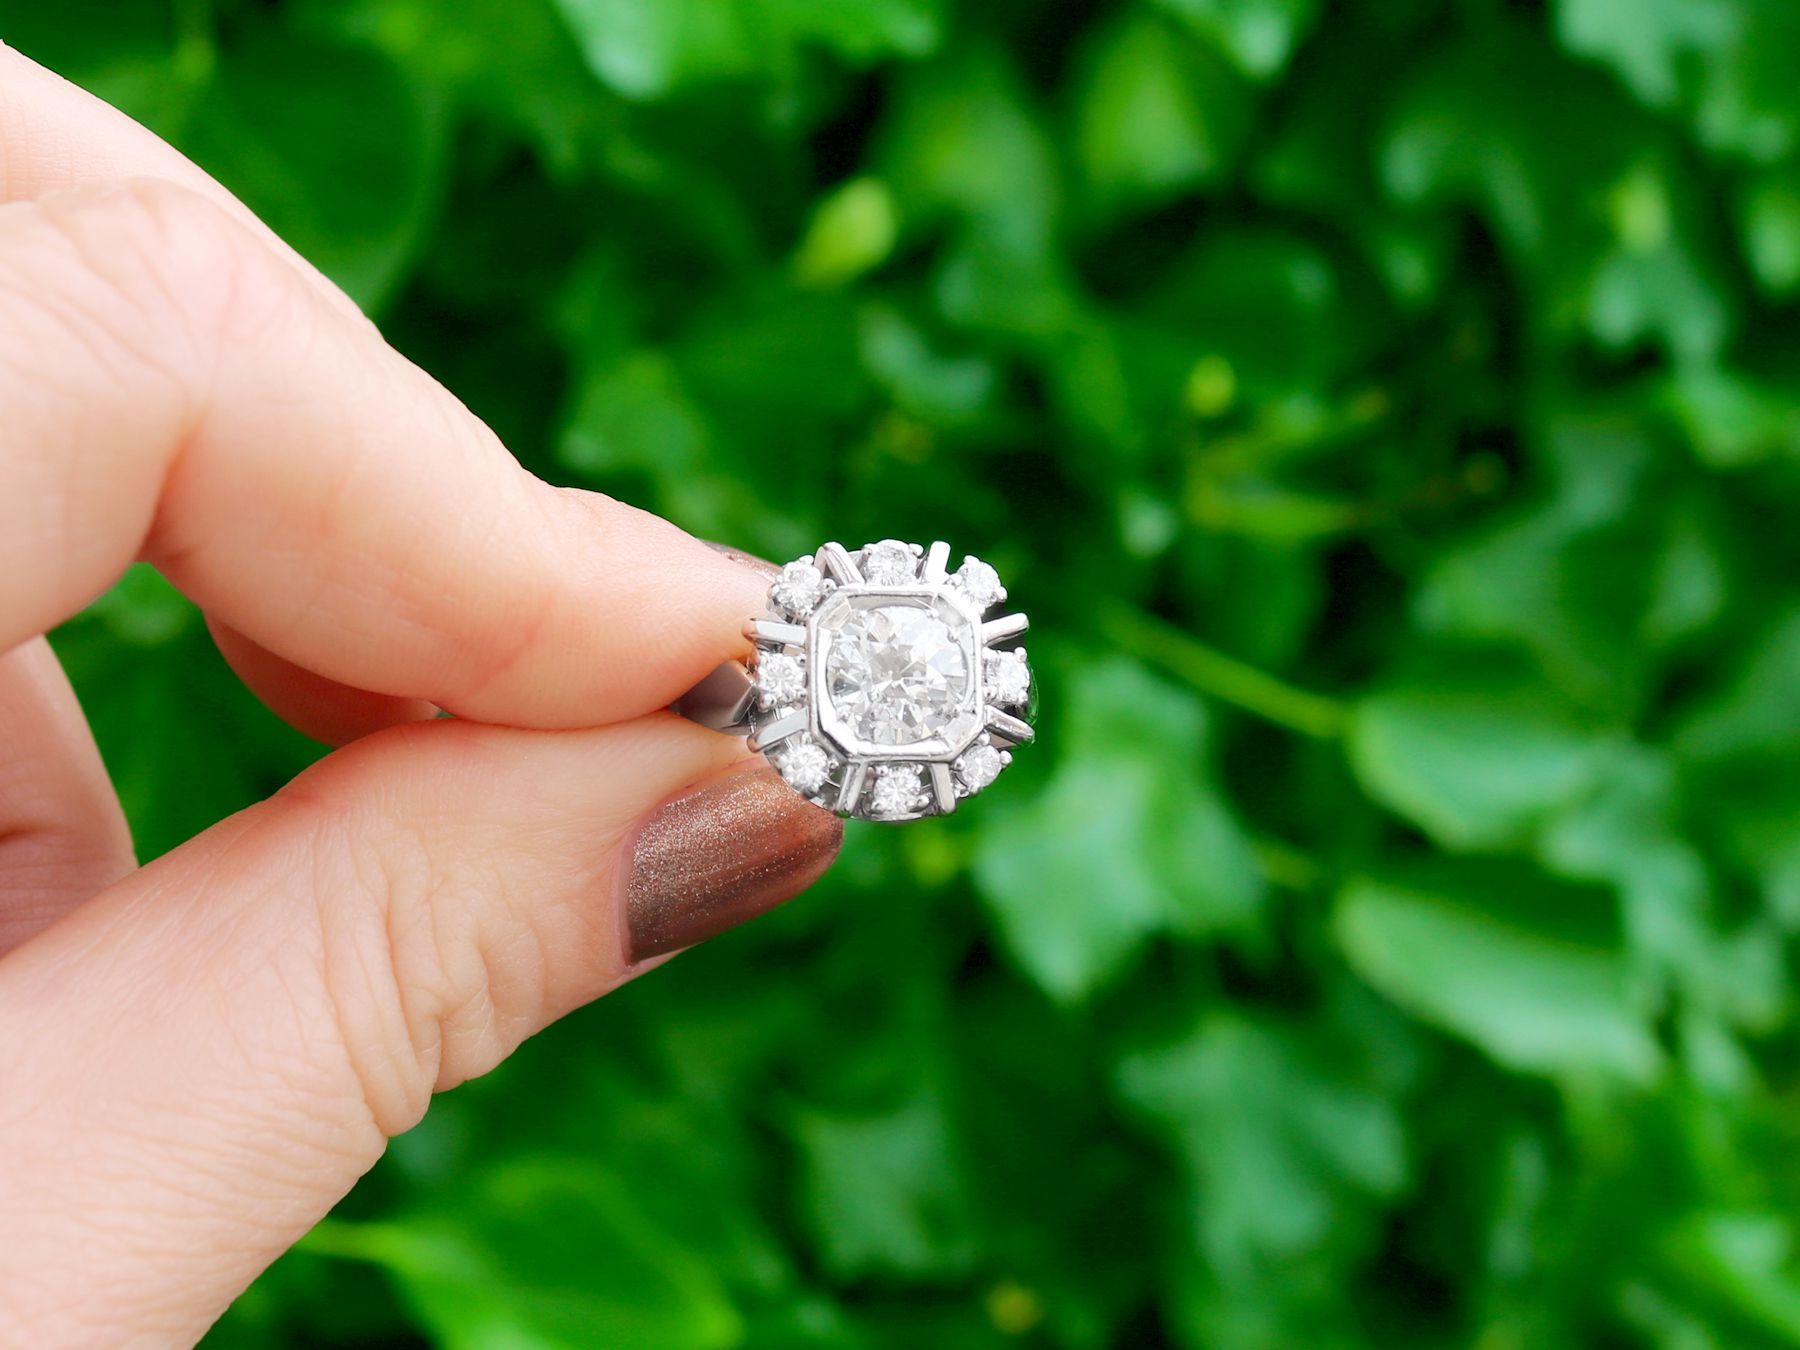 A stunning antique and vintage 1.68 carat diamond and 14 karat white gold dress ring; part of our diverse diamond jewelry and estate jewelry collections.

This stunning, fine and impressive vintage diamond ring has been crafted in 14k white